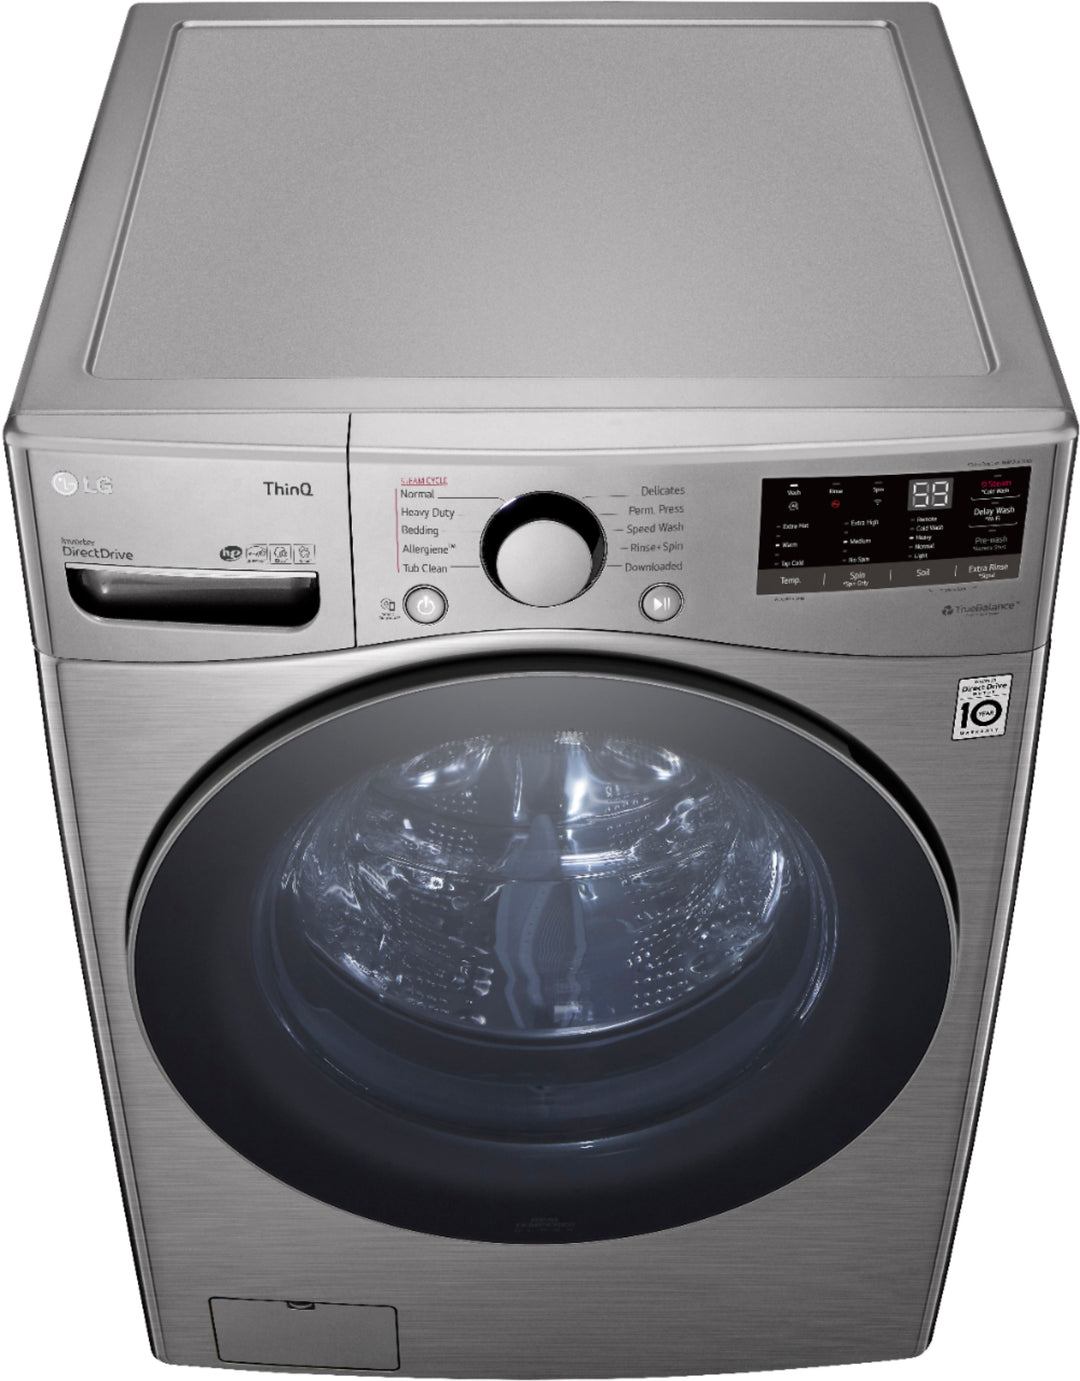 LG - 4.5 Cu. Ft. High-Efficiency Stackable Smart Front Load Washer with Steam and 6Motion Technology - Graphite steel_21